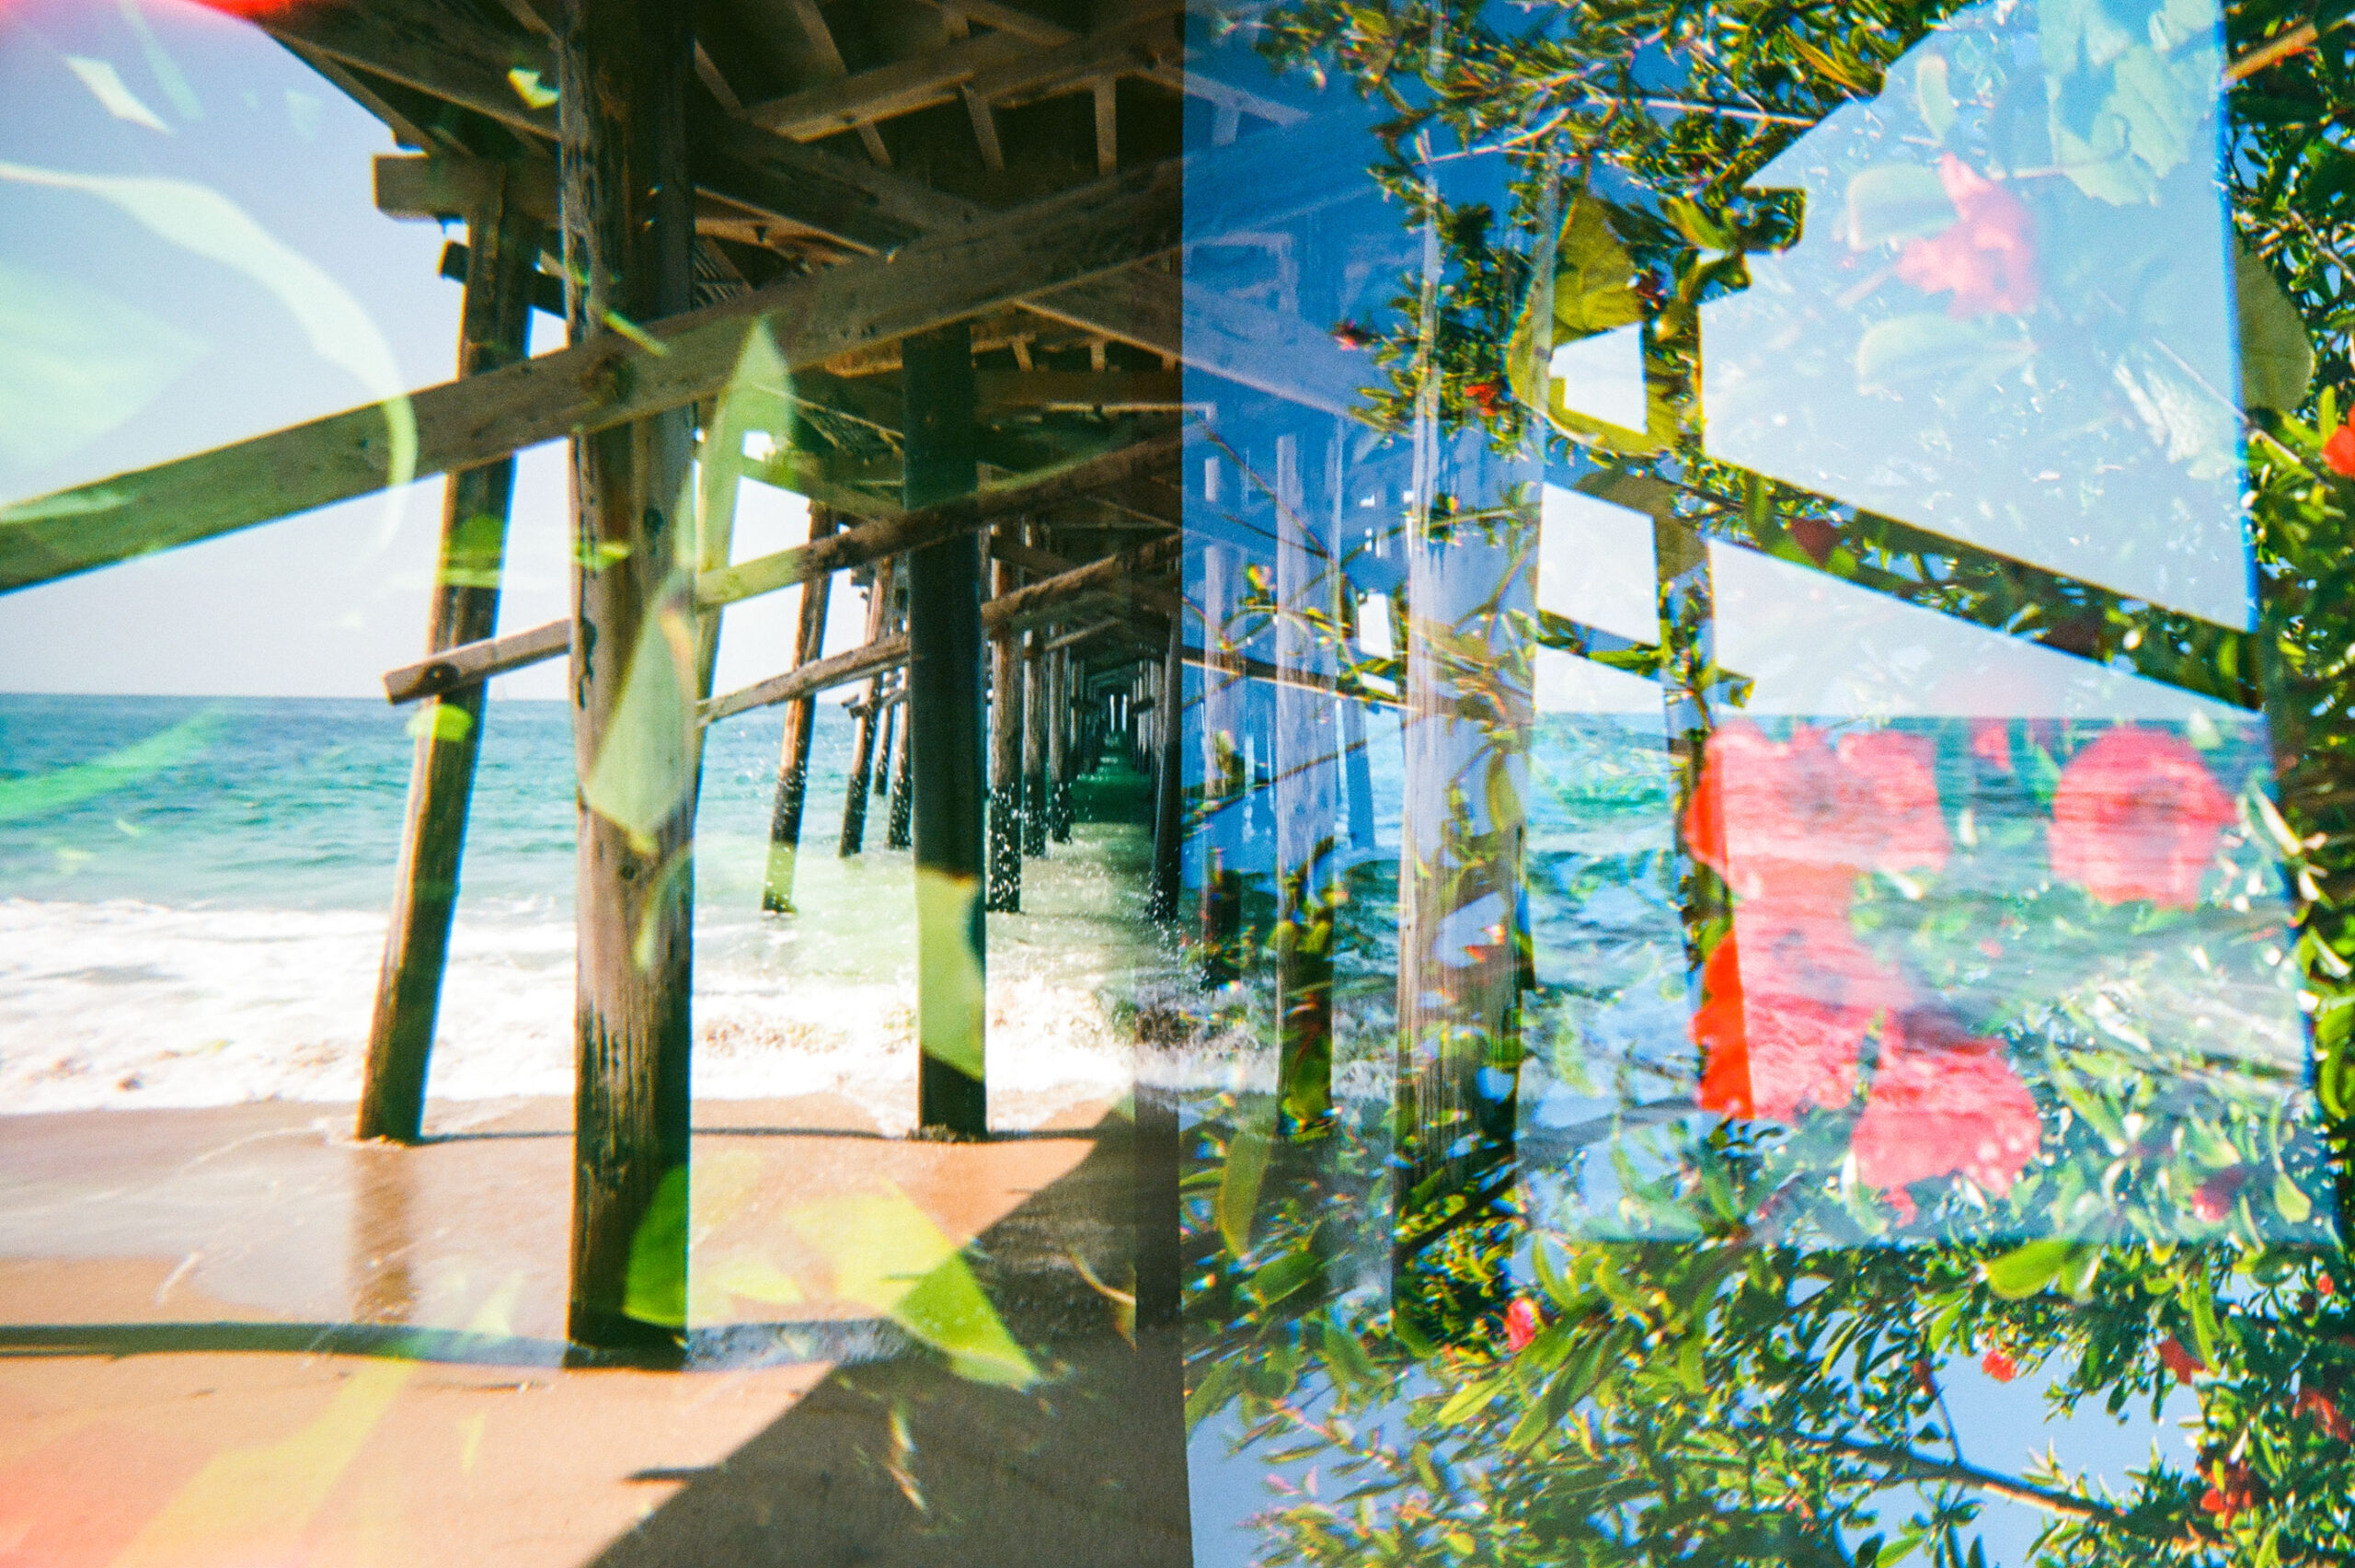 Dive into a world of super-saturated color film photography with Jennifer Lawrence